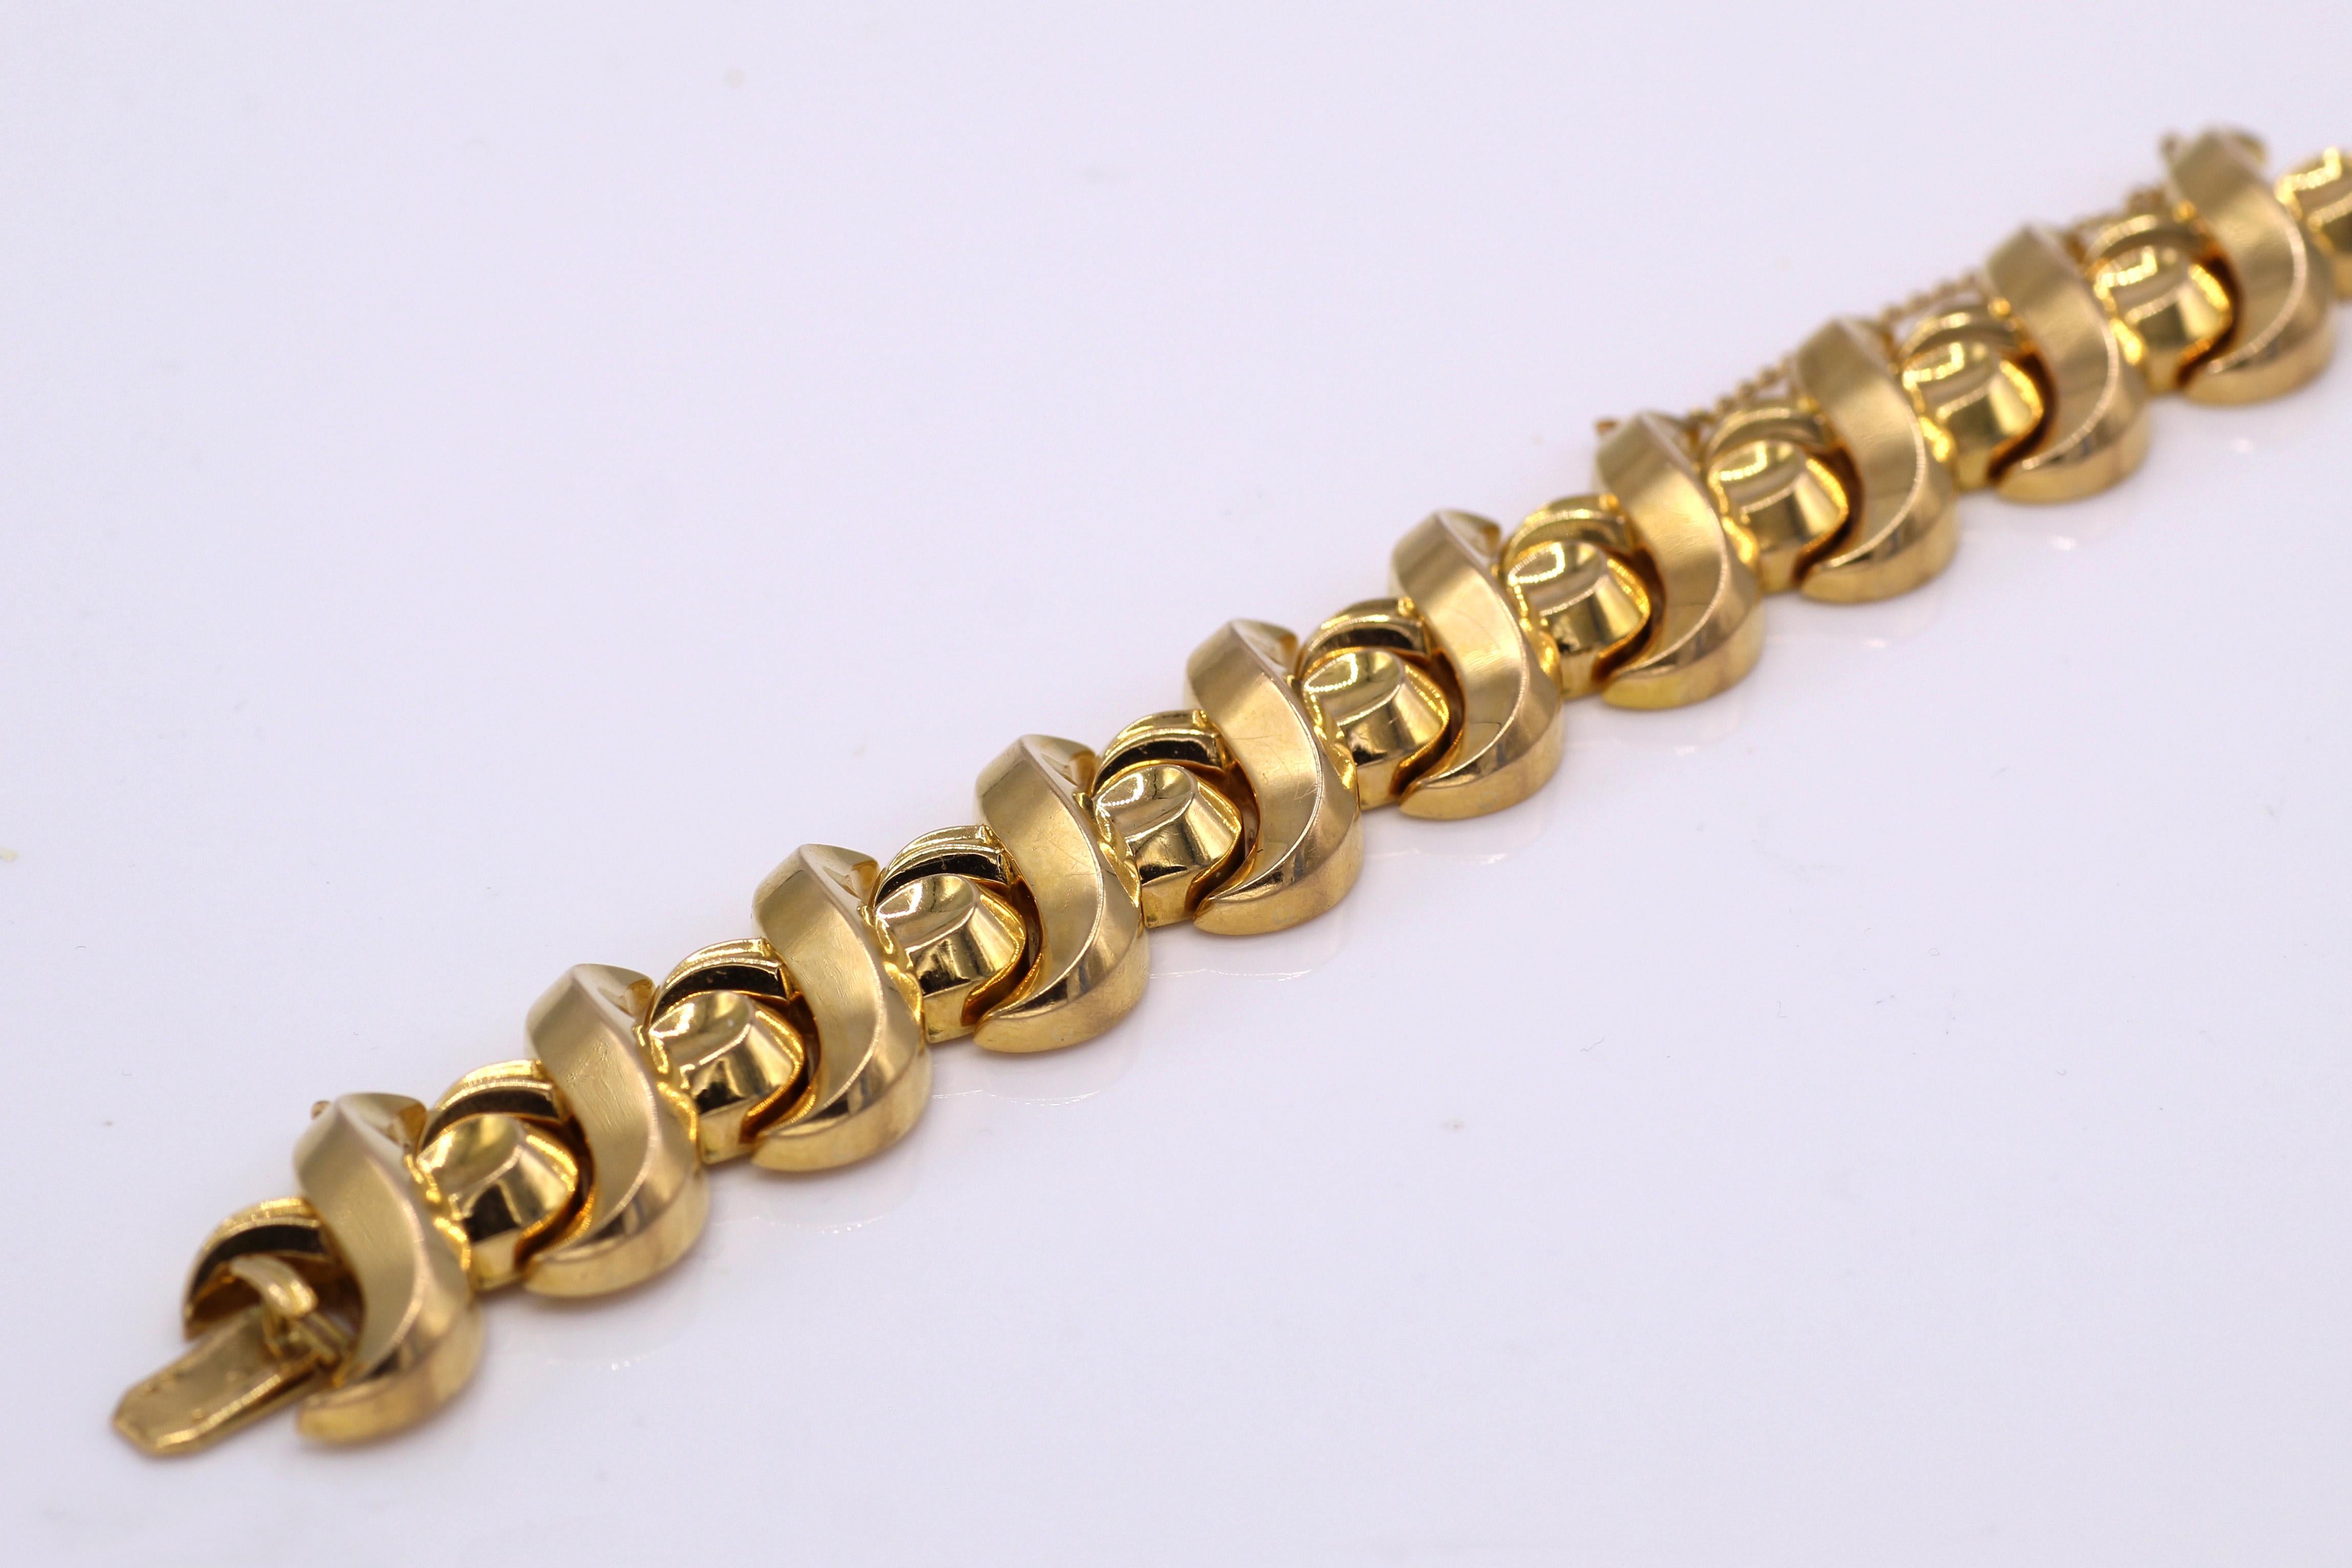 French 18 karat yellow gold link bracelet from ca 1945. Beautifully designed with a three dimensional look this bold and chic Retro bracelet is a unique and bold wear. French assay marks and makers mark on the tongue of the lock. 